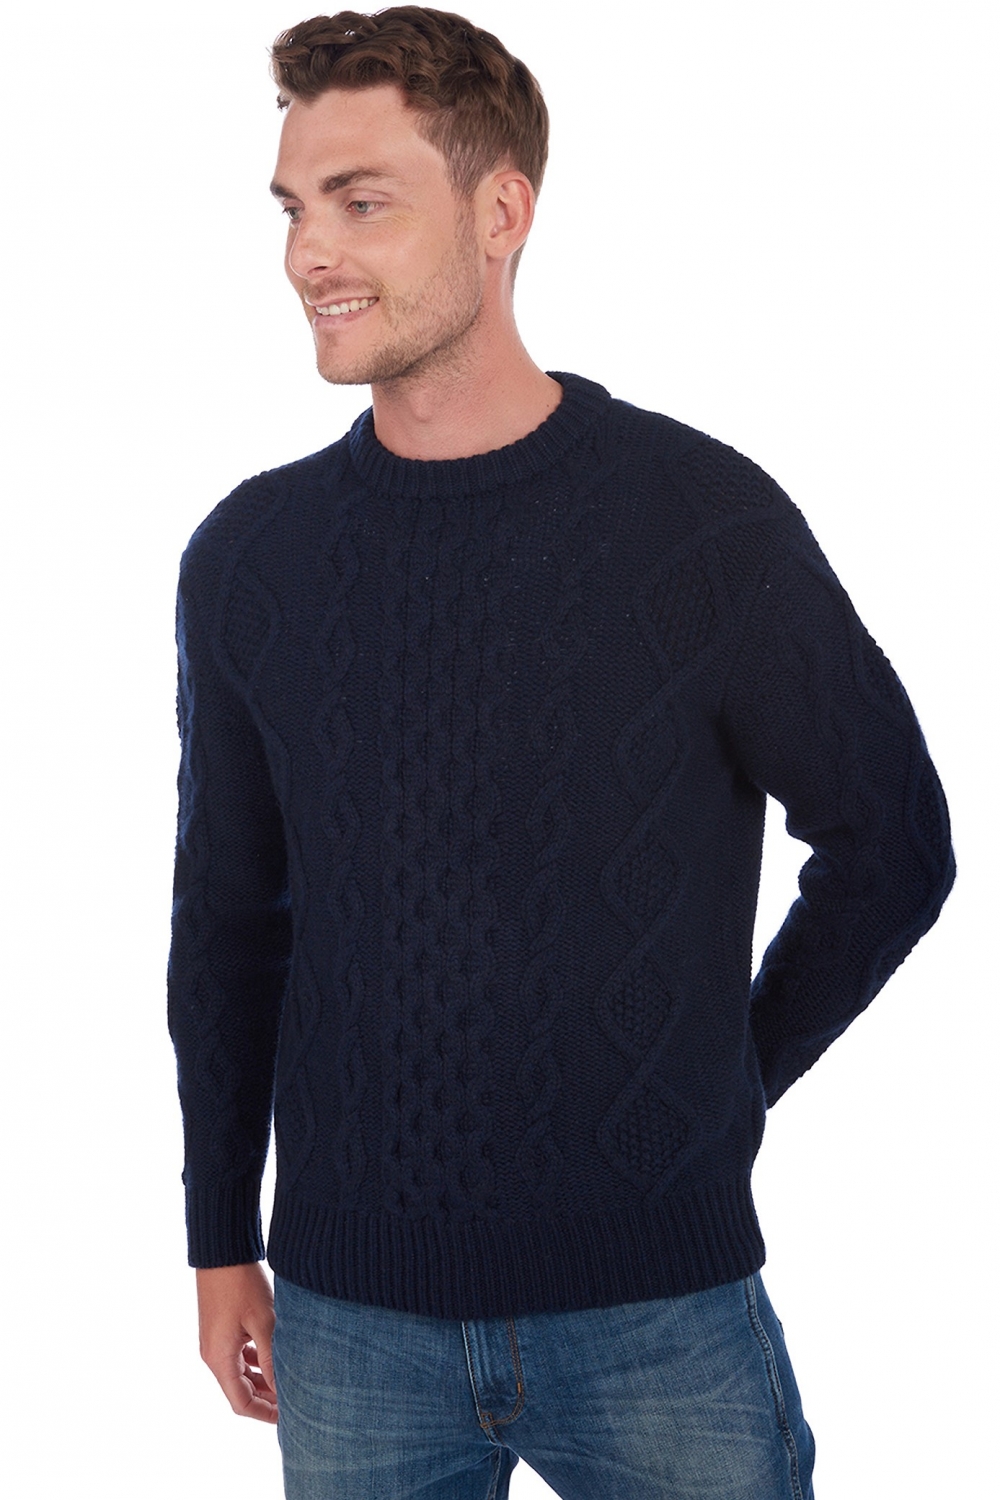 Cachemire pull homme acharnes marine fonce l